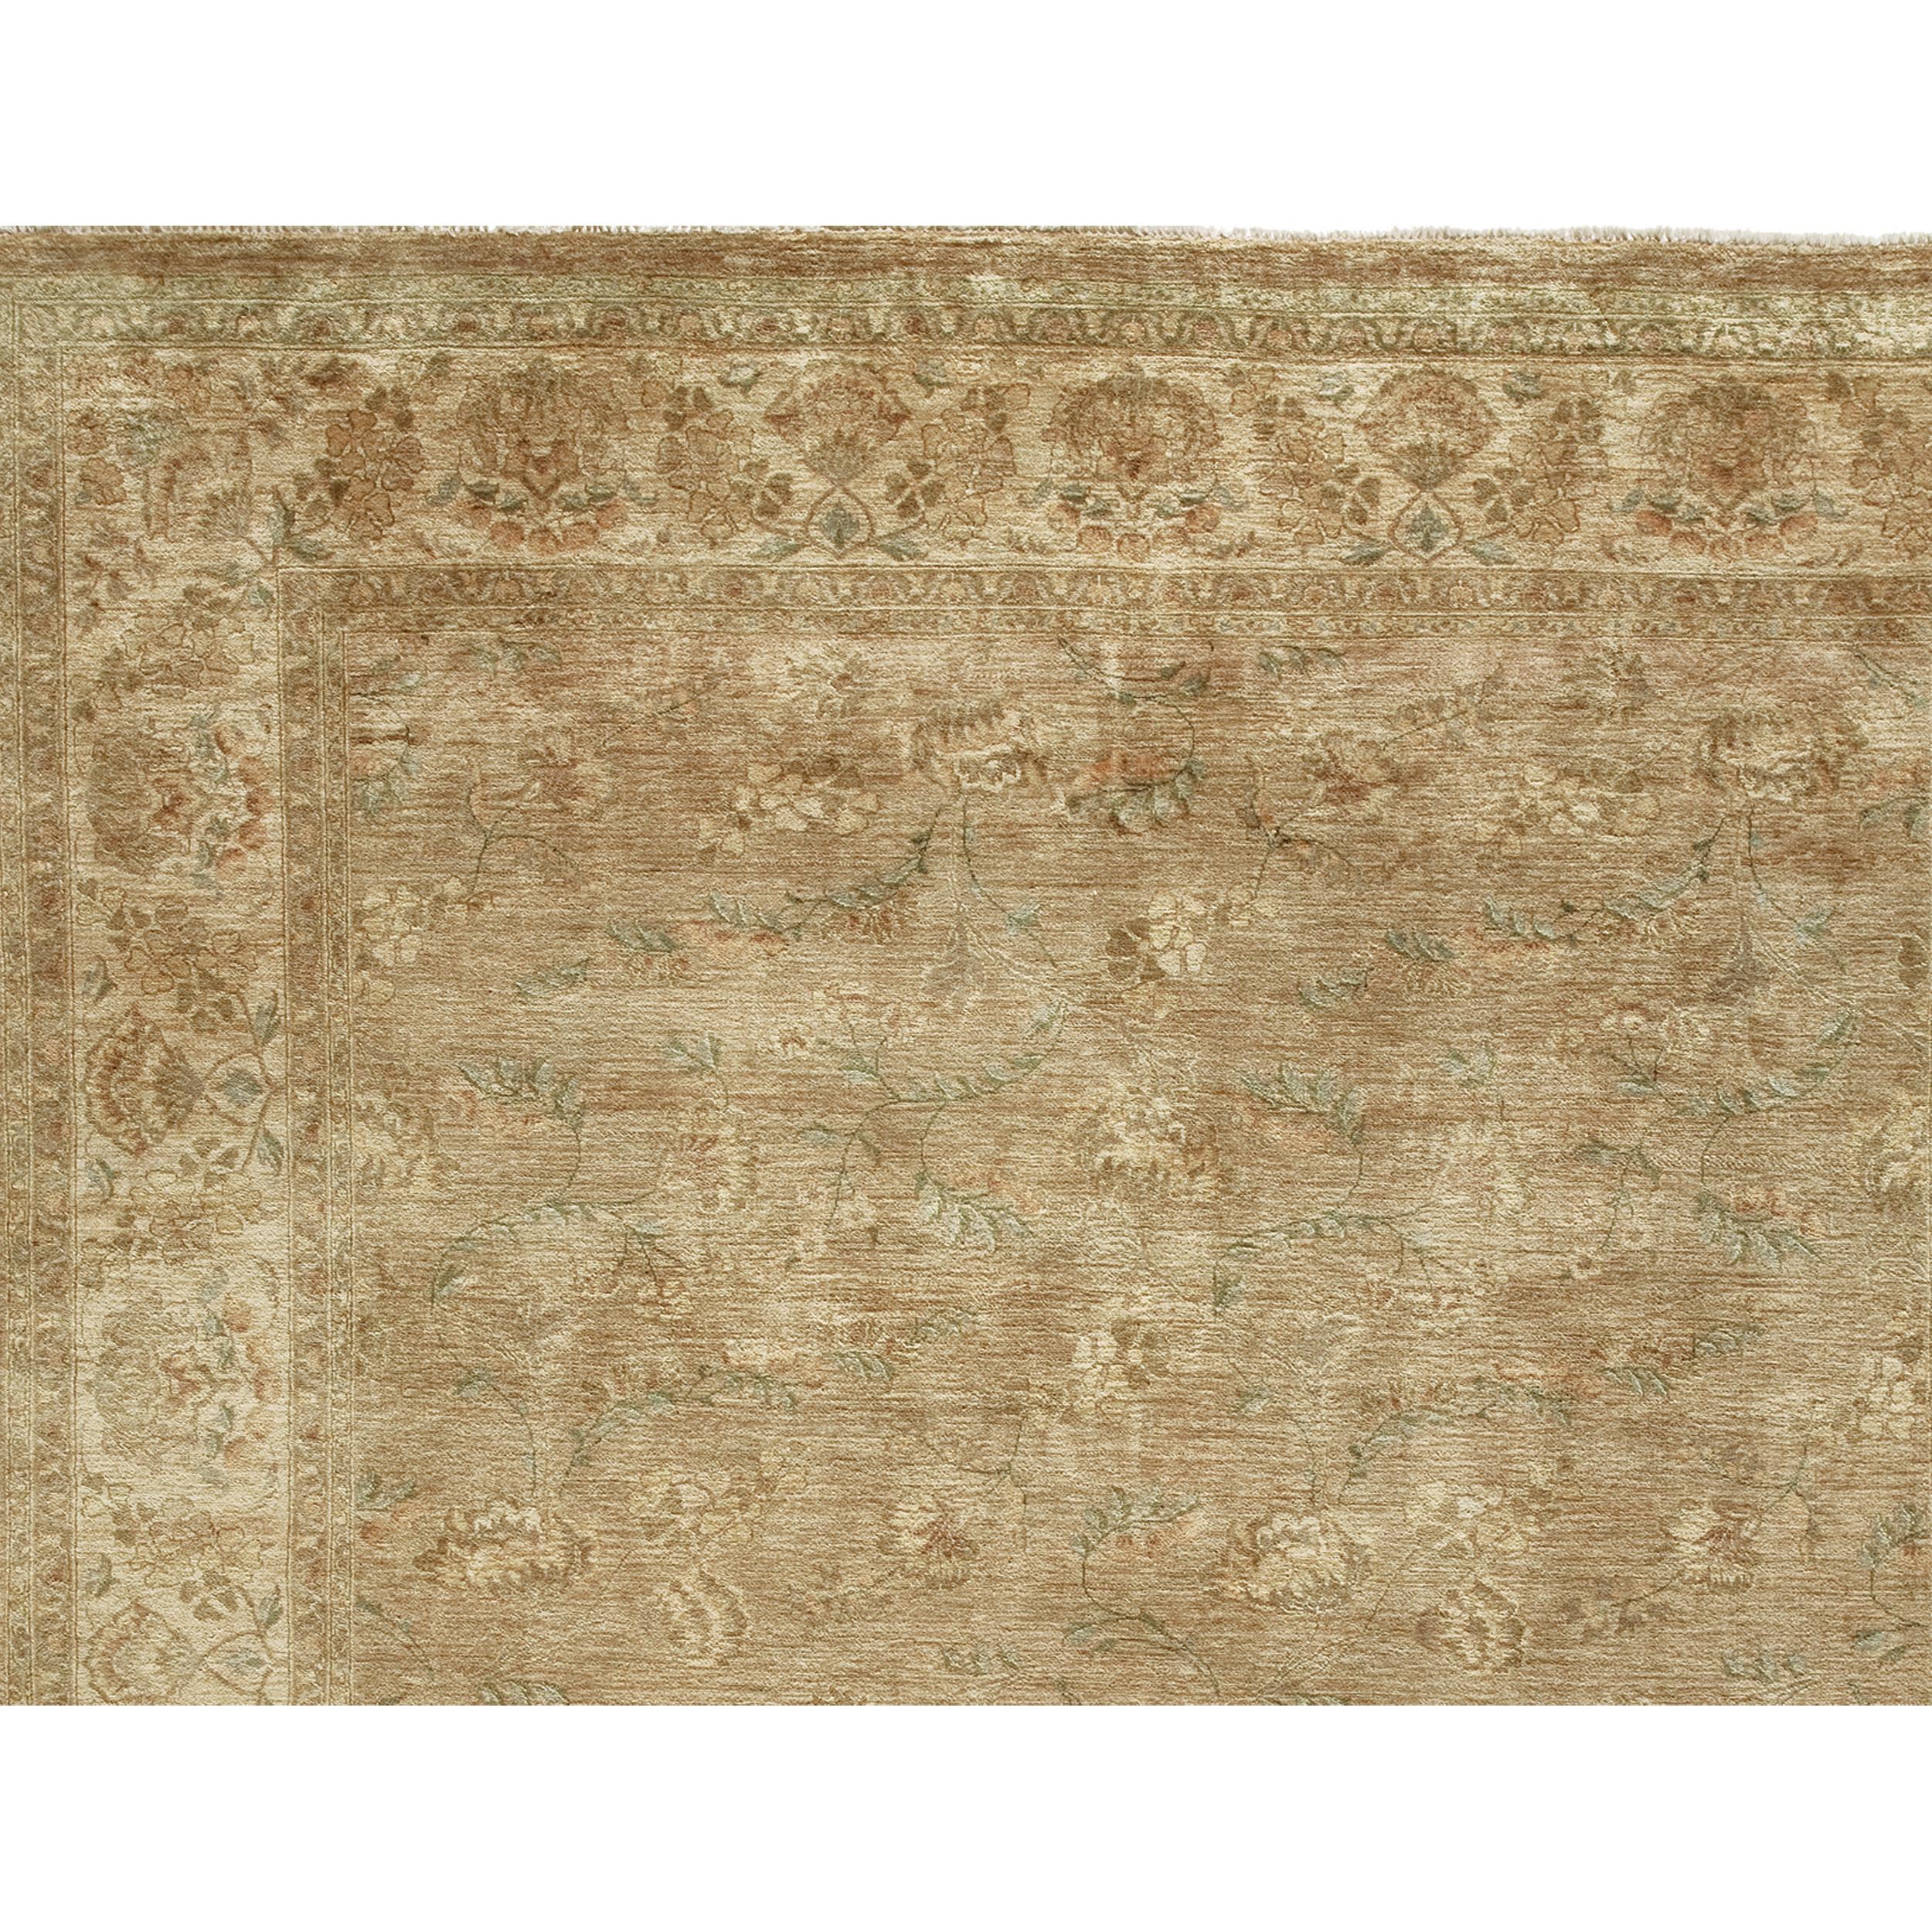 Luxury Traditional Hand-Knotted Flora Beige/Cream 12x18 Rug In New Condition For Sale In Secaucus, NJ